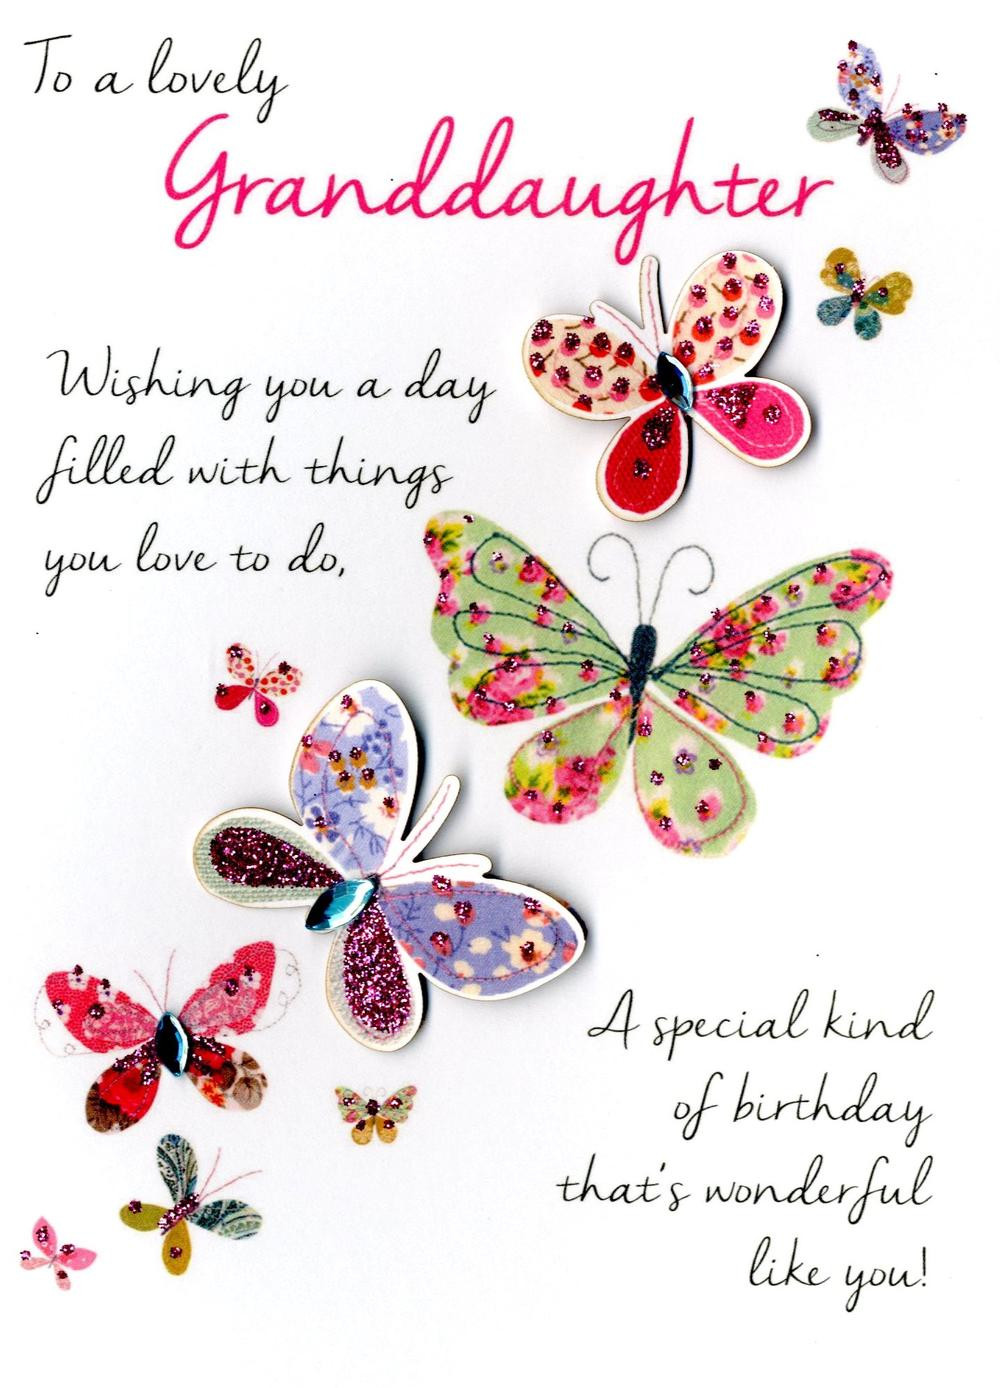 Birthday Wishes For A Granddaughter
 Lovely Granddaughter Birthday Greeting Card